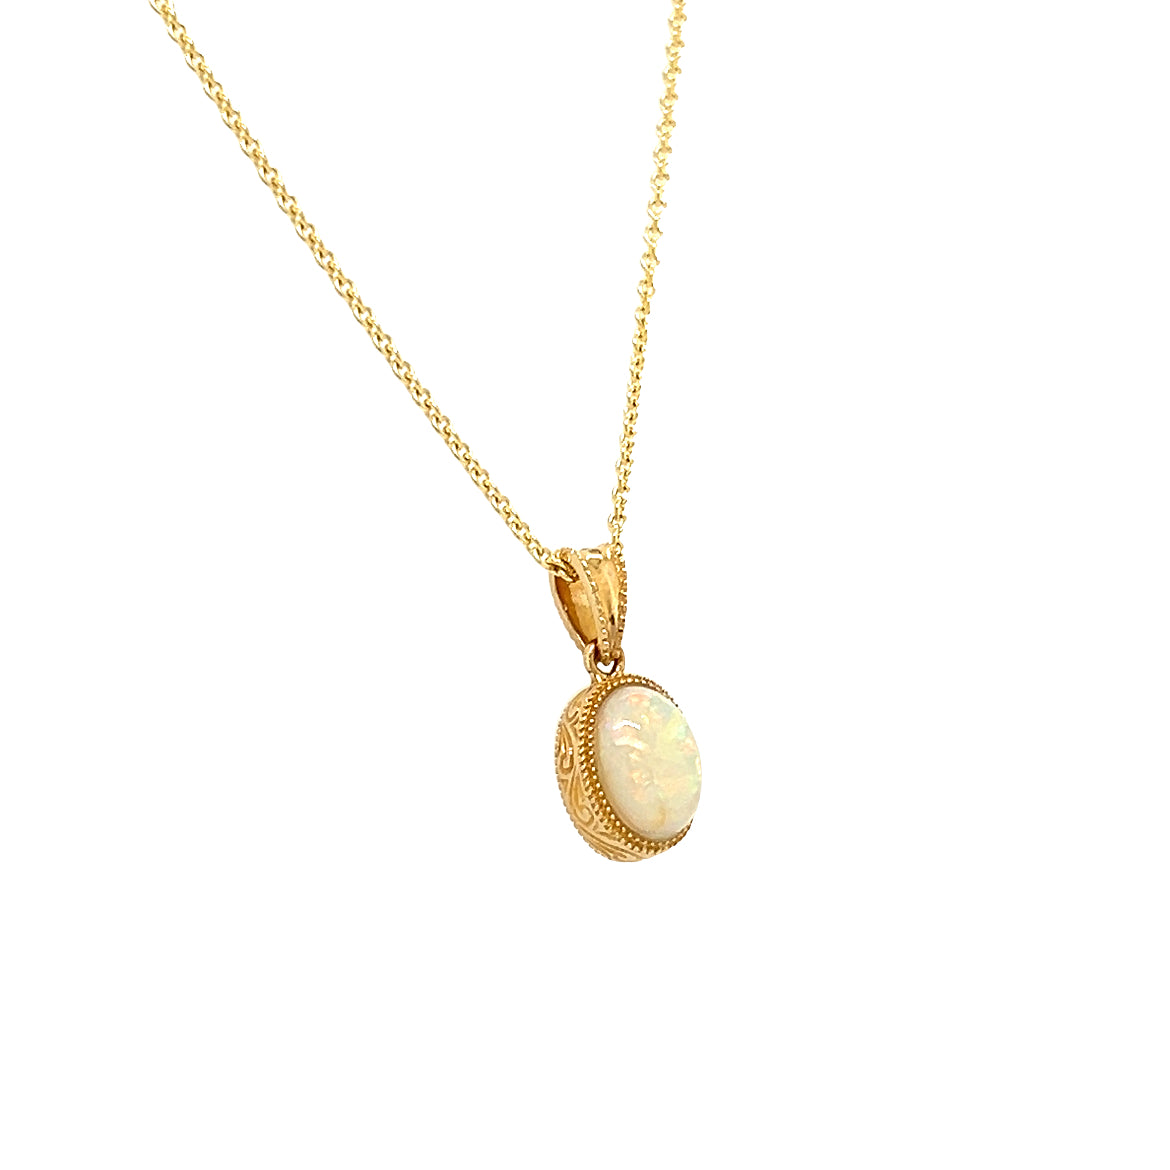 White Opal Pendant with Engraving and Milgrain Details in 14K Yellow Gold Left Side View